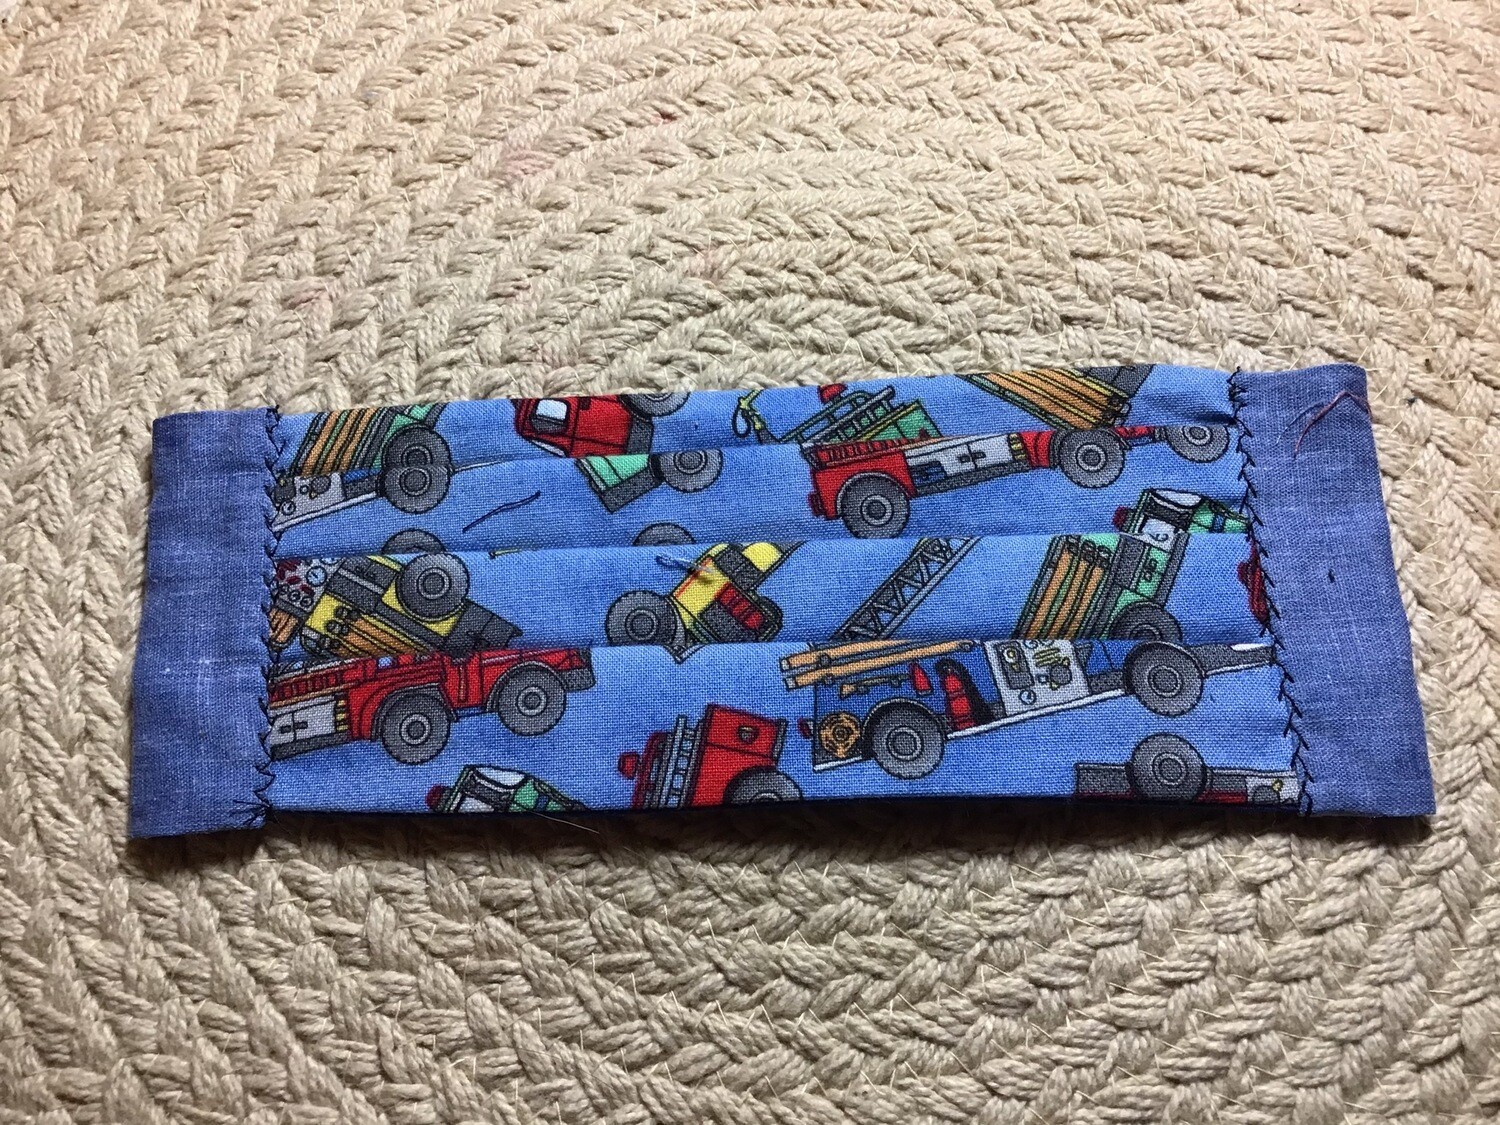 Artisan all about boys & trains measures 61/2“ - 2 Elastic Straps Included